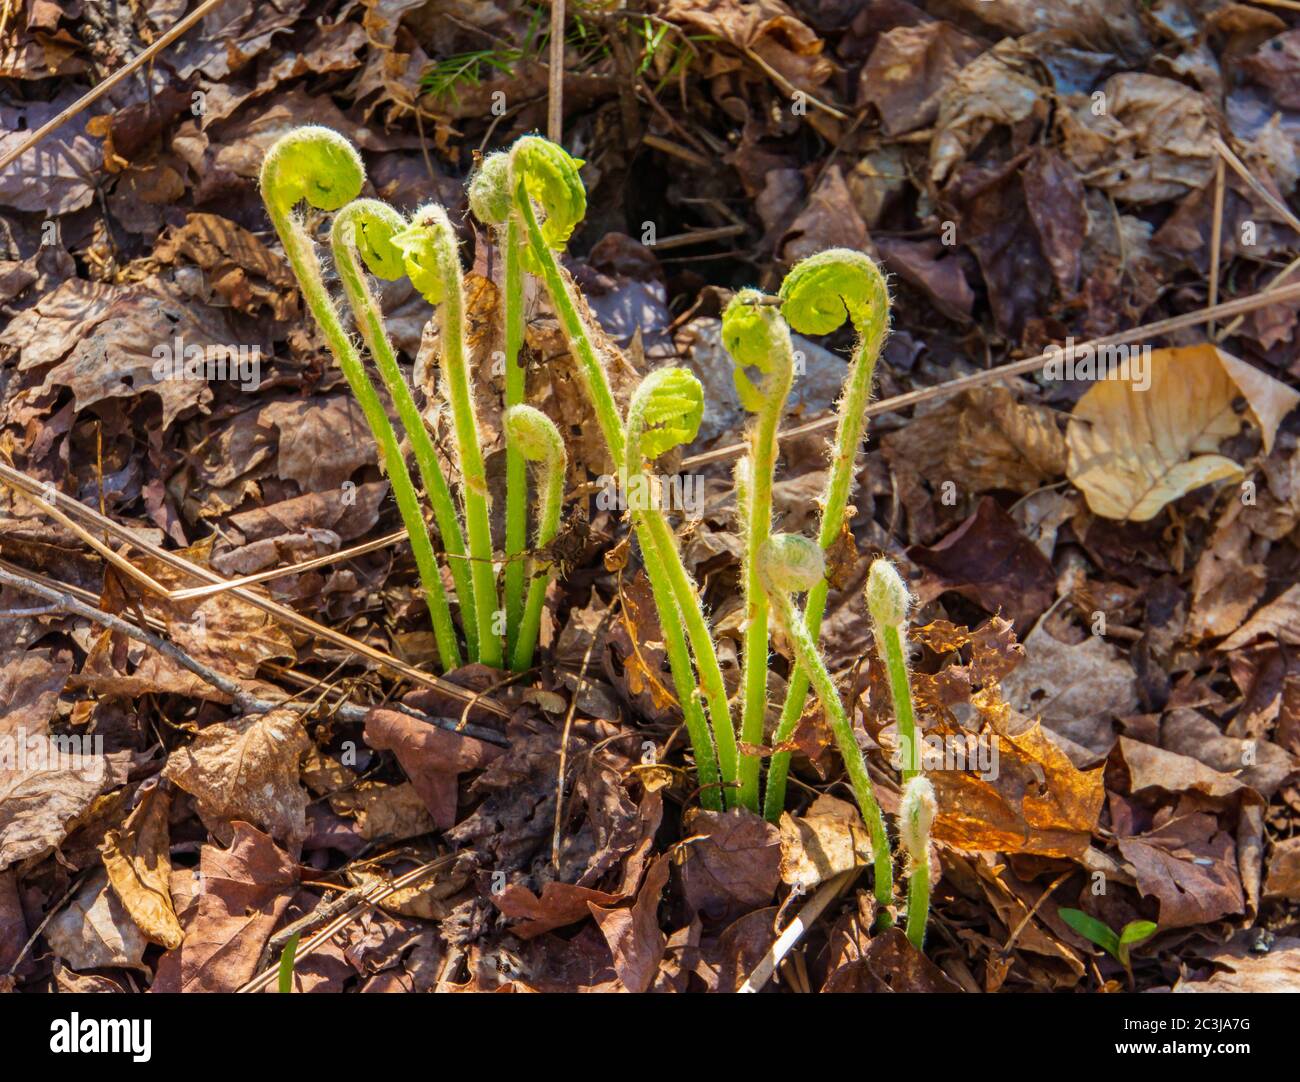 Fiddleheads, the furled fronds of new spring ferns: a culinary delicacy Stock Photo